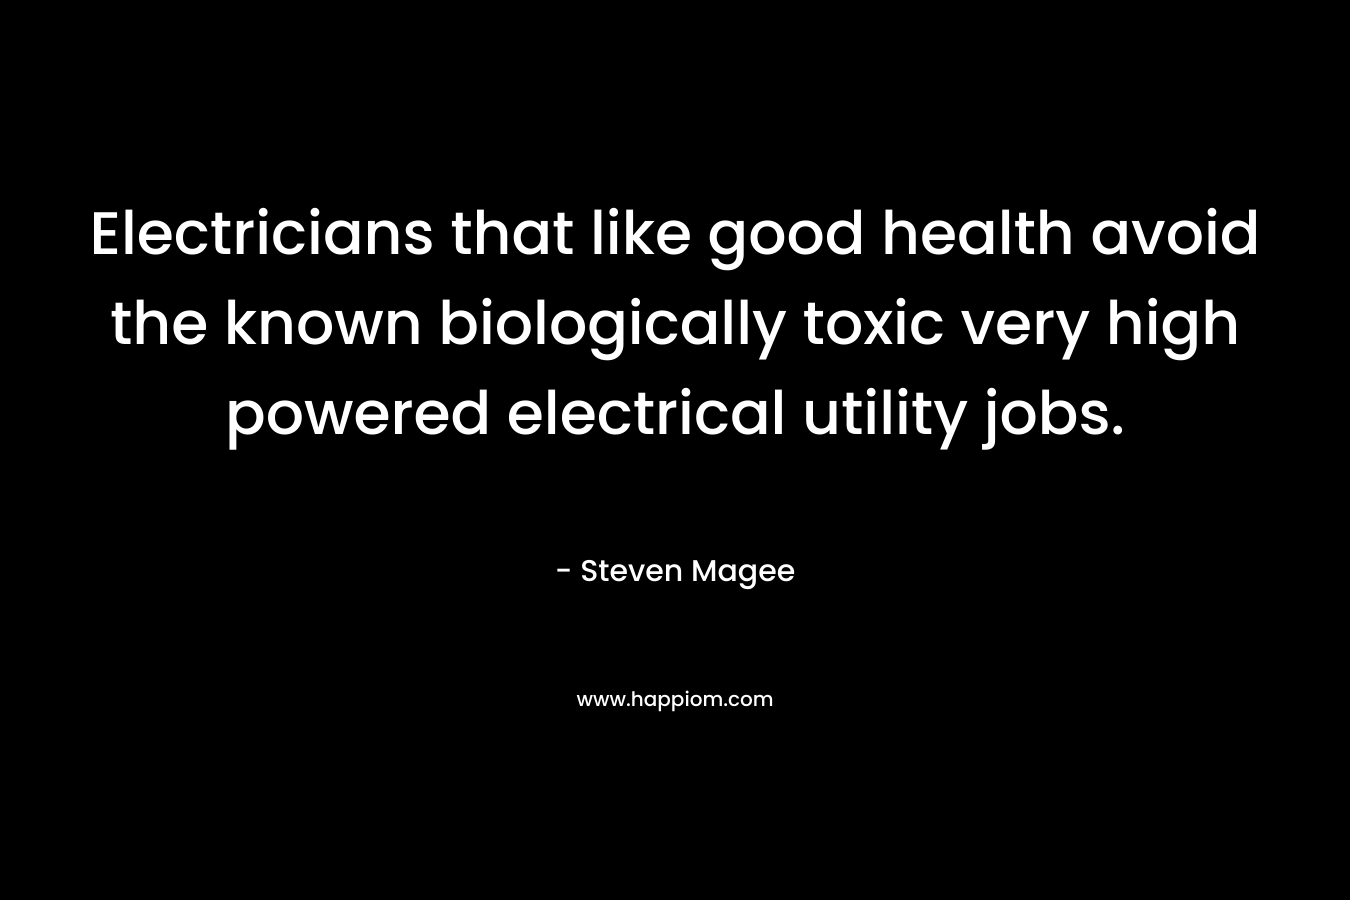 Electricians that like good health avoid the known biologically toxic very high powered electrical utility jobs. – Steven Magee